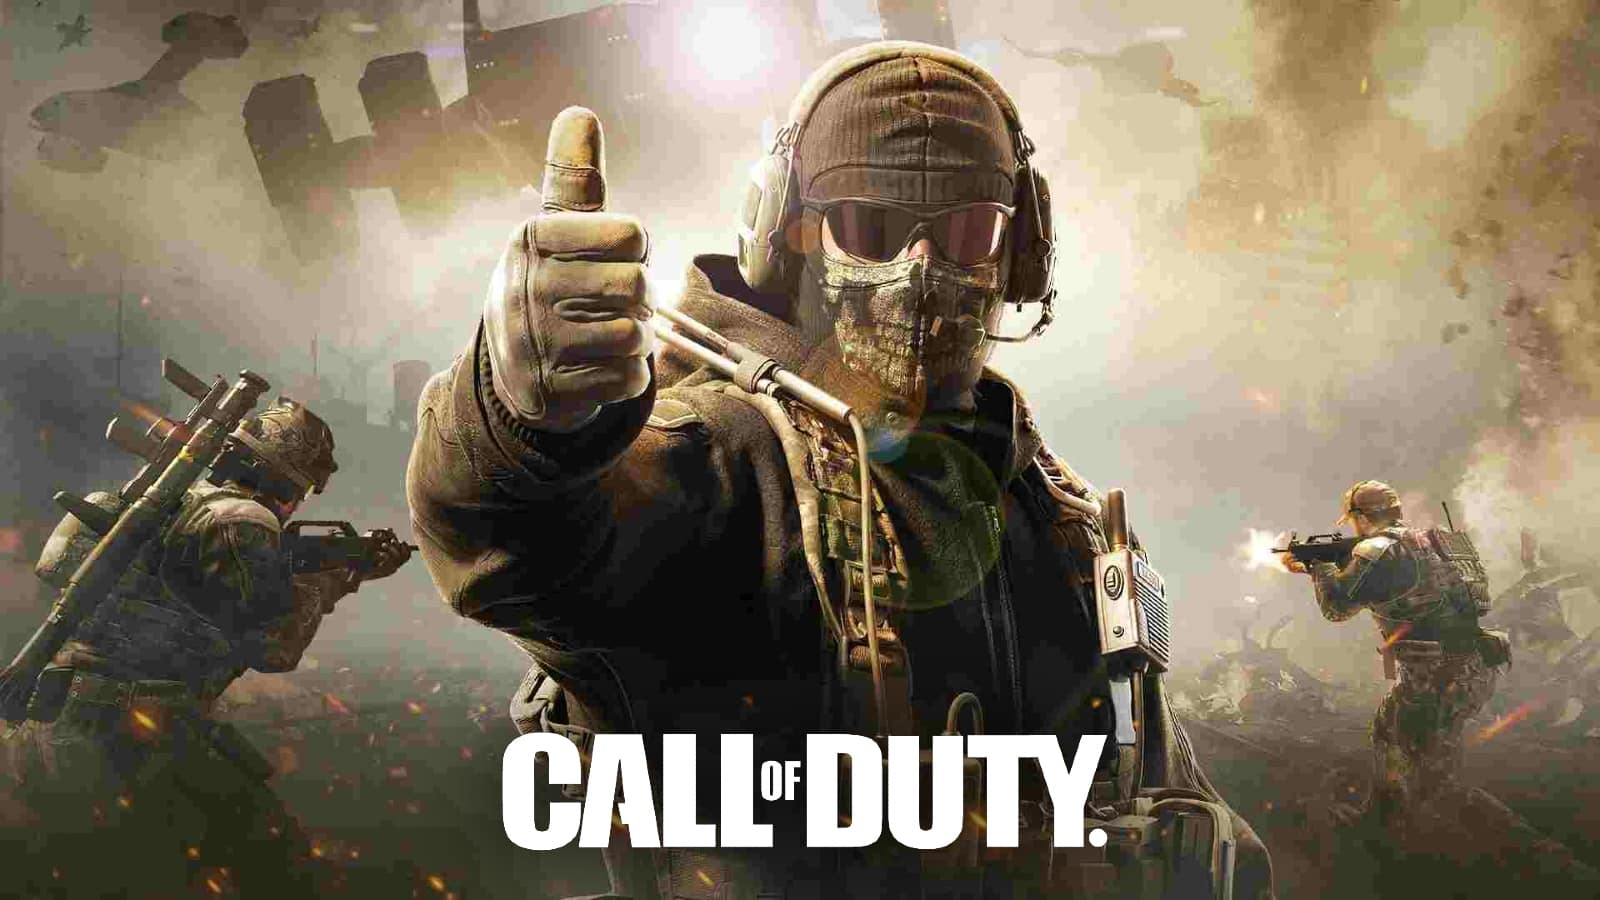 Call Of Duty 2023 is Modern Warfare 2 2 from Sledgehammer says